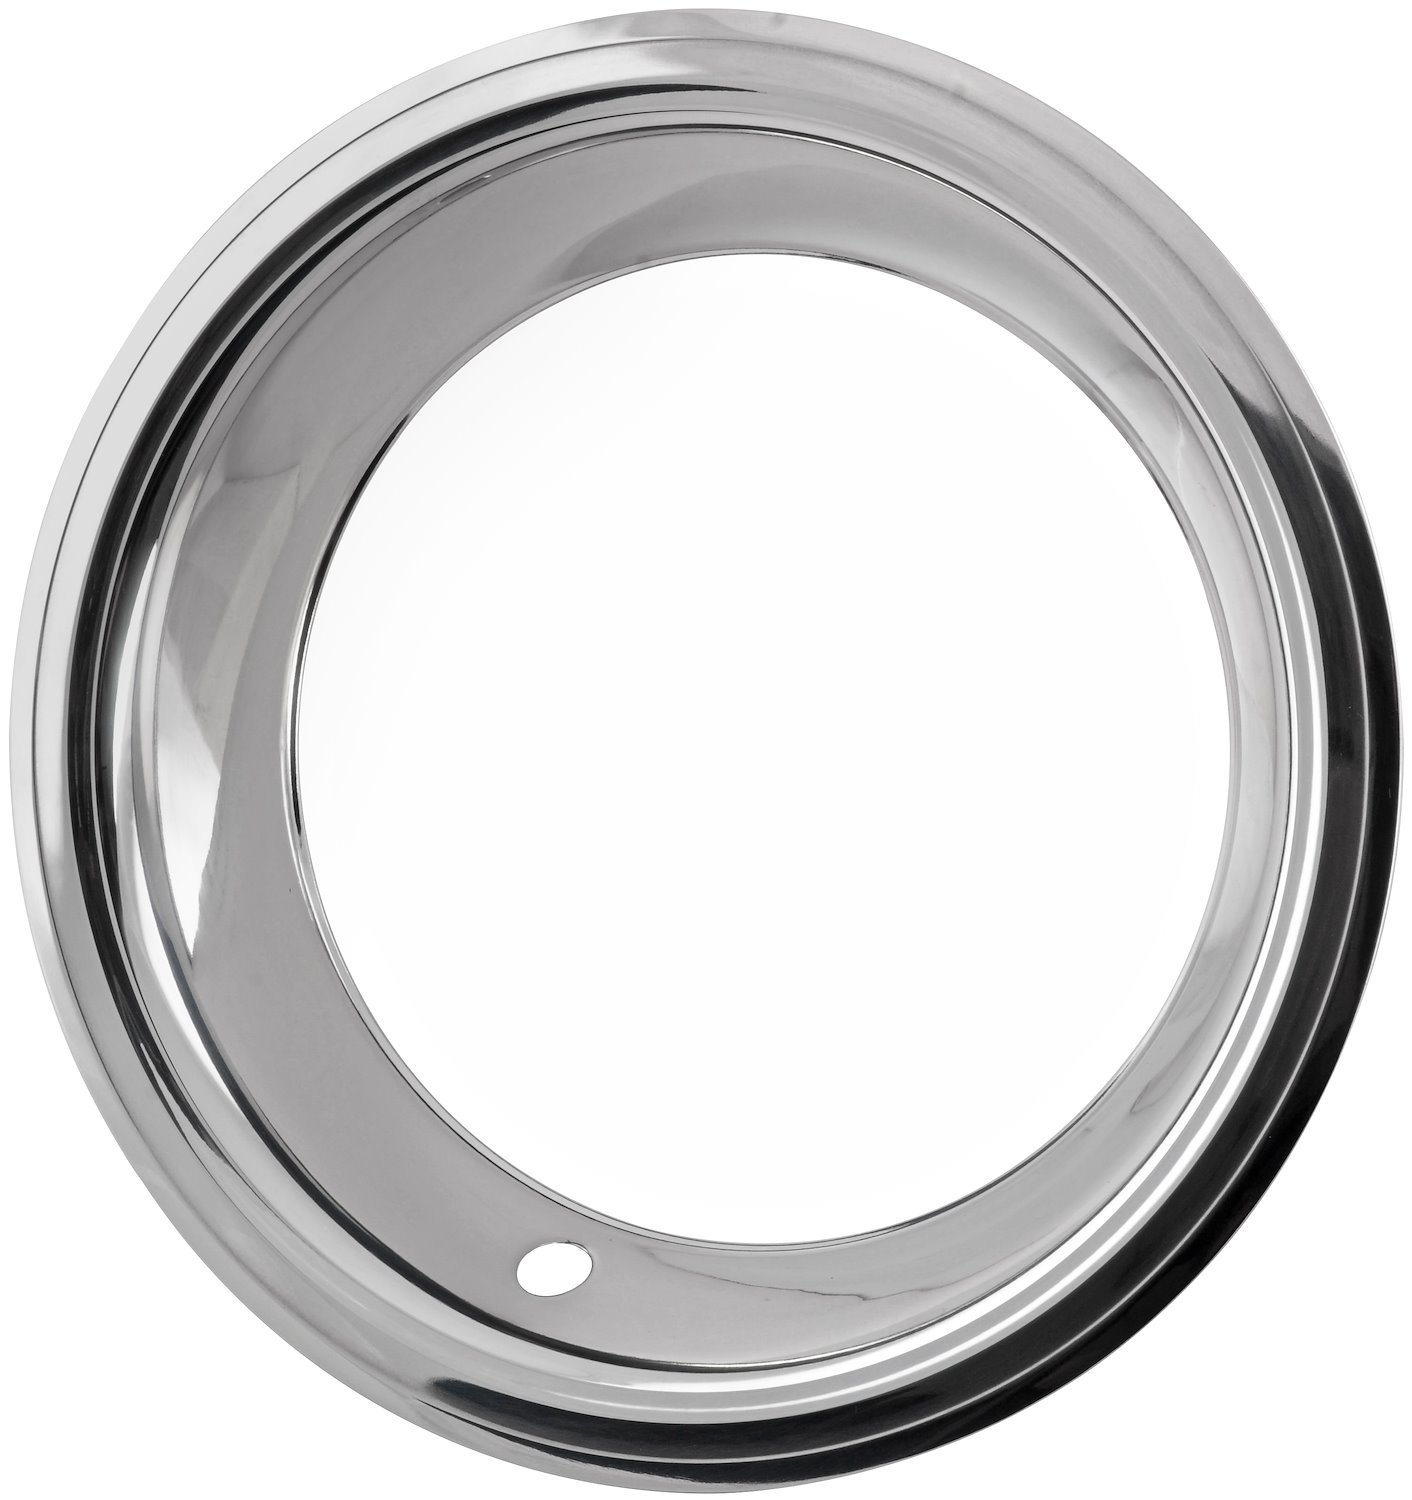 Stainless Steel Trim Ring for JEGS 15 in. x 7 in. Rally Wheels